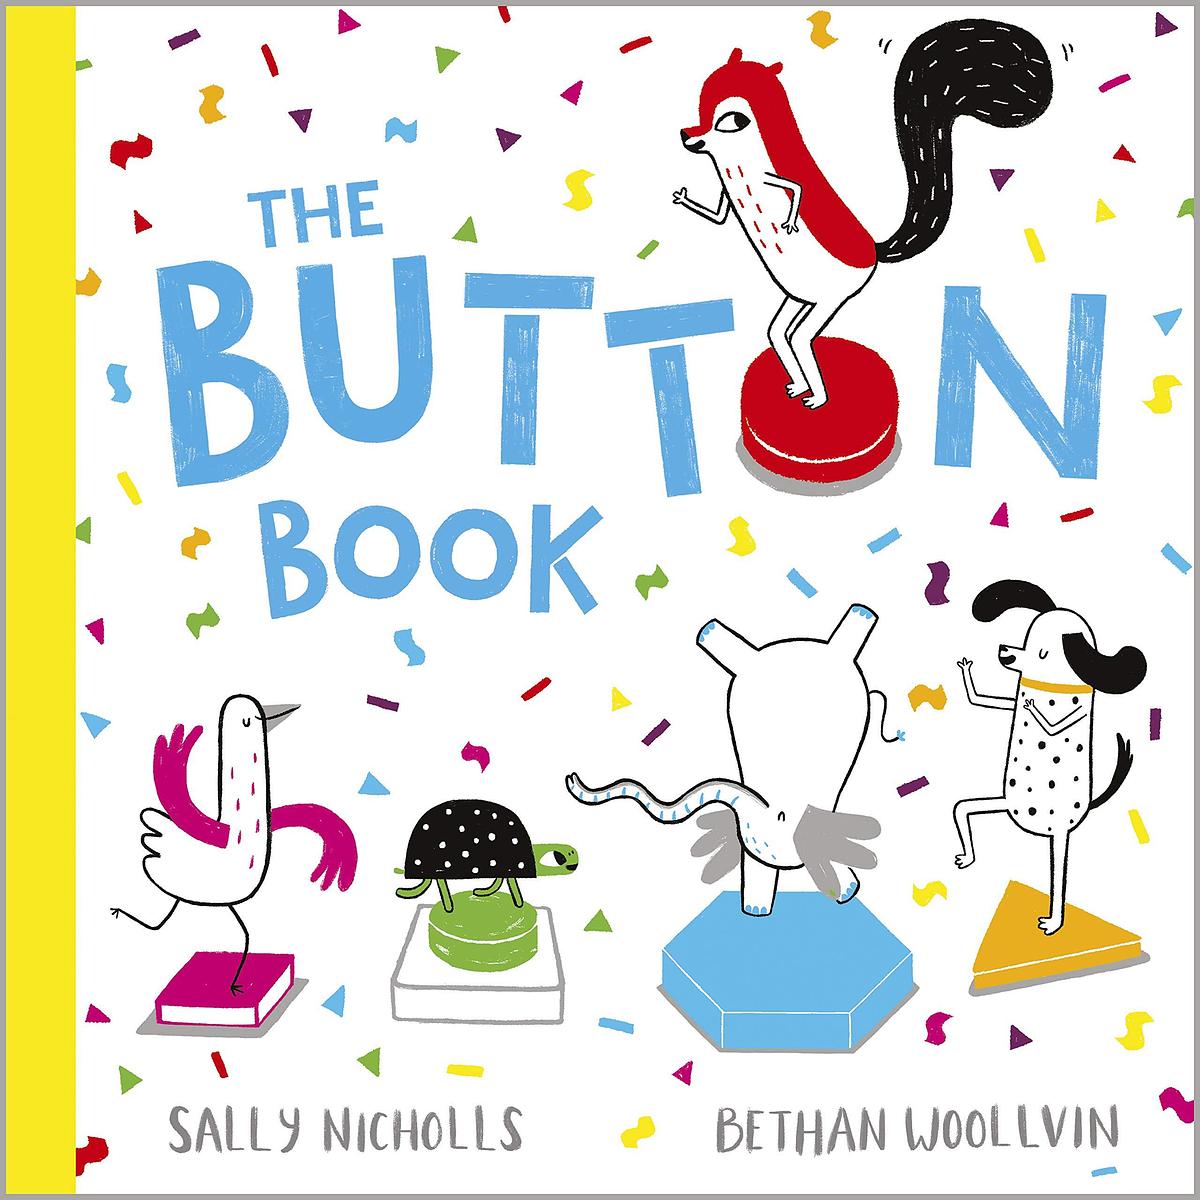 Front cover of "The Button Book" by Sally Nicholls and Bethan Woollvin